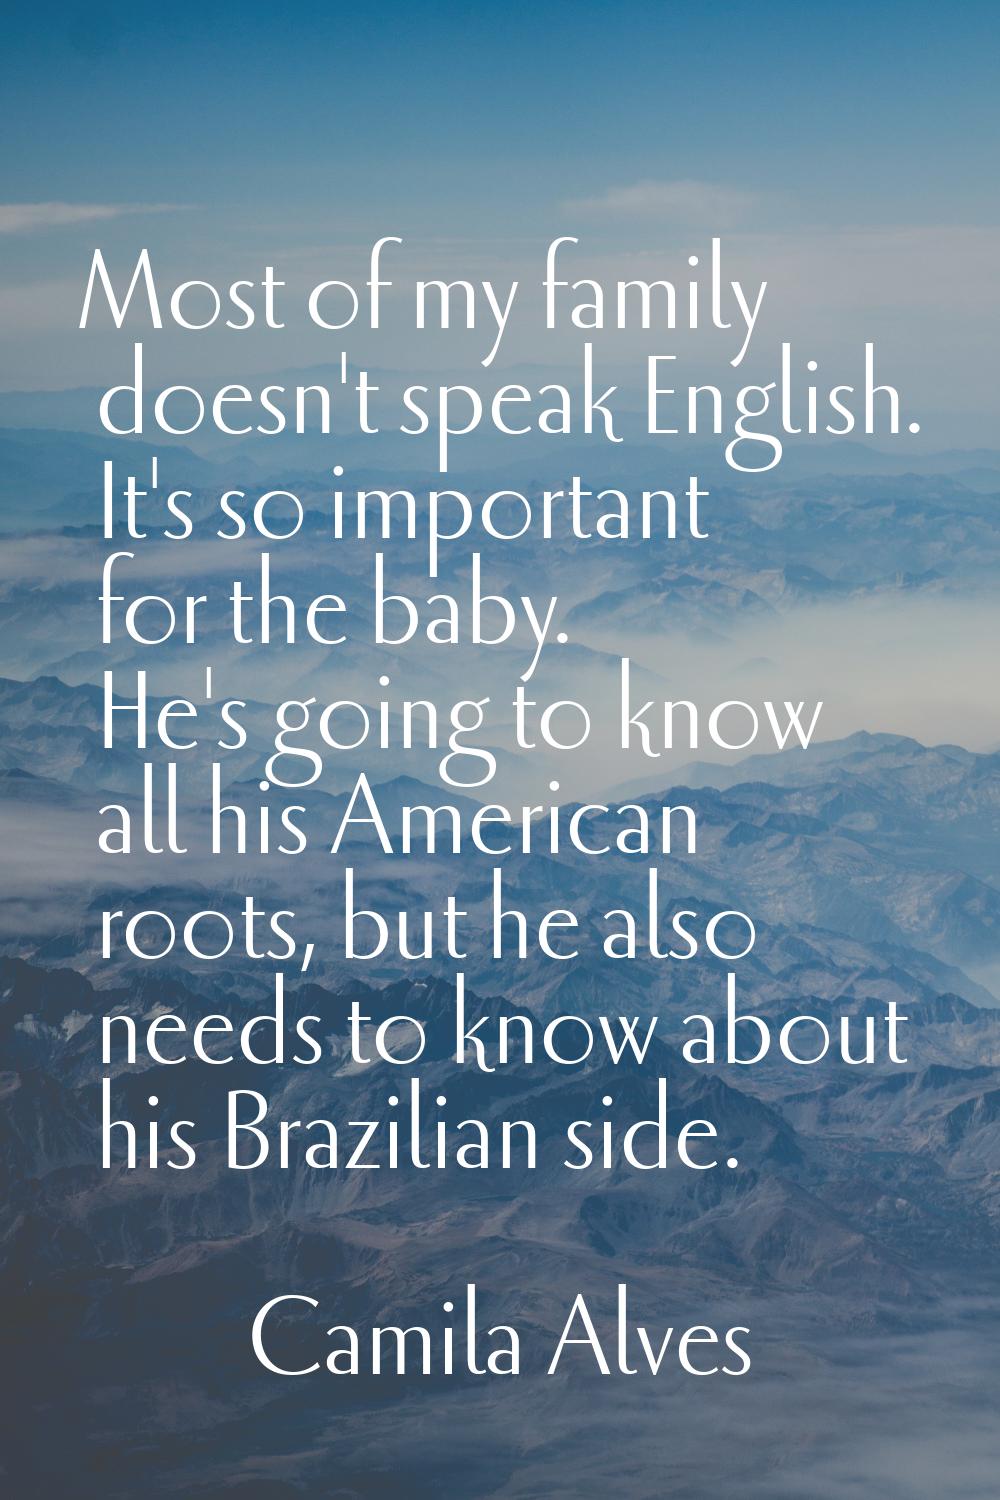 Most of my family doesn't speak English. It's so important for the baby. He's going to know all his